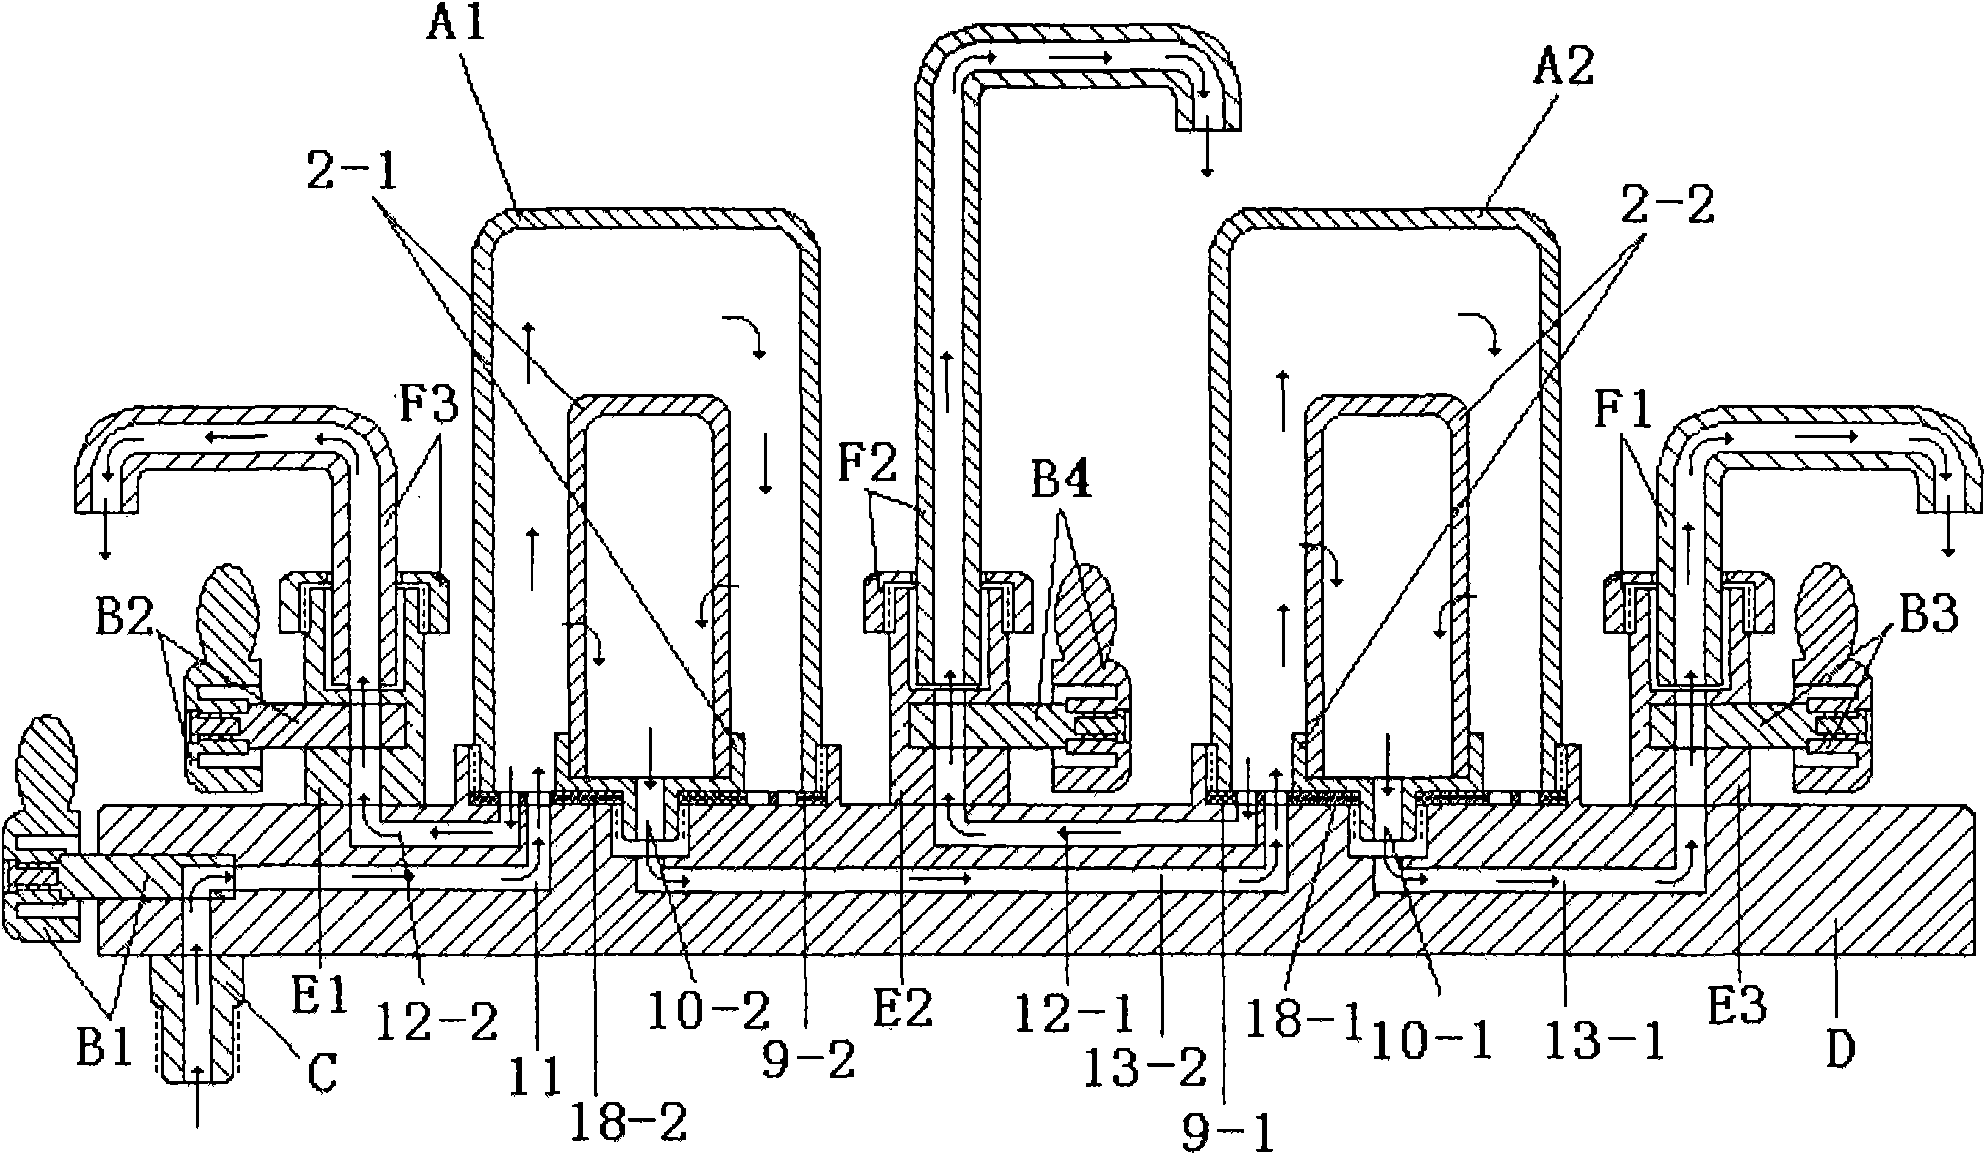 Three-tube siamesed tap with water filters